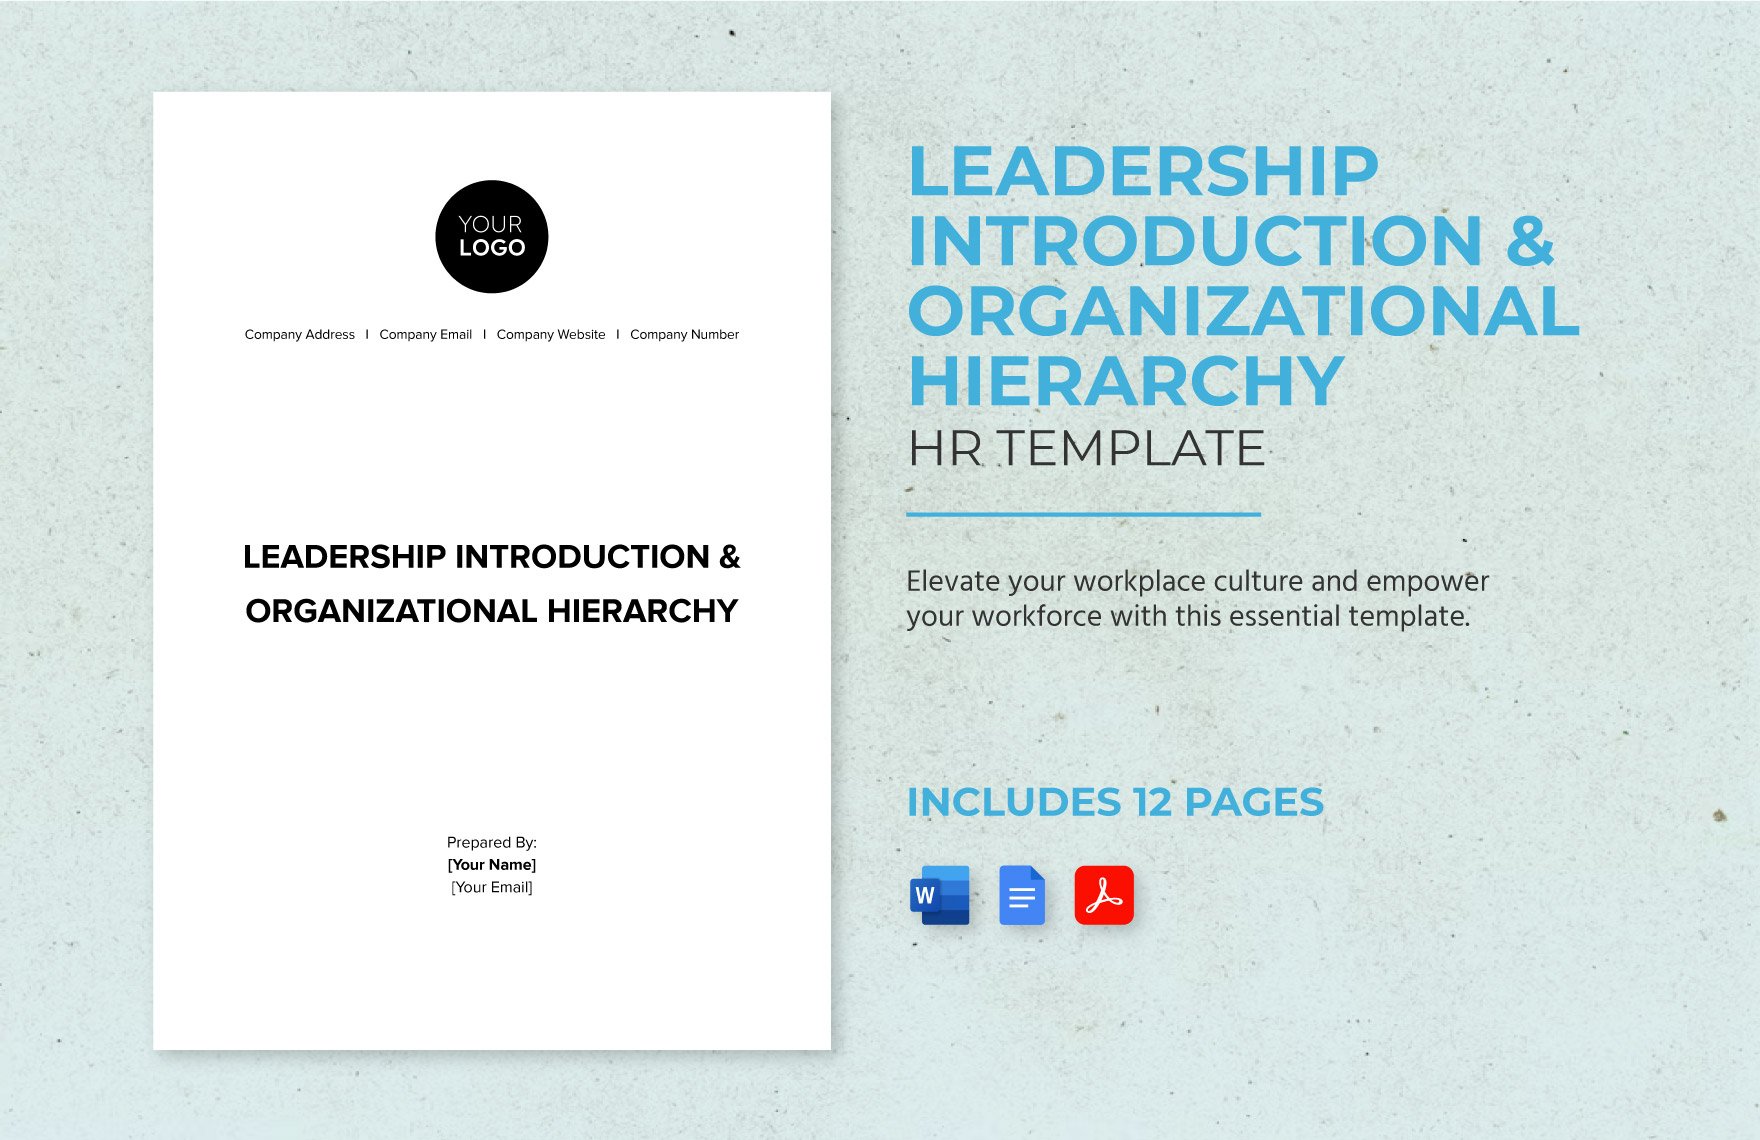 Leadership Introduction & Organizational Hierarchy HR Template